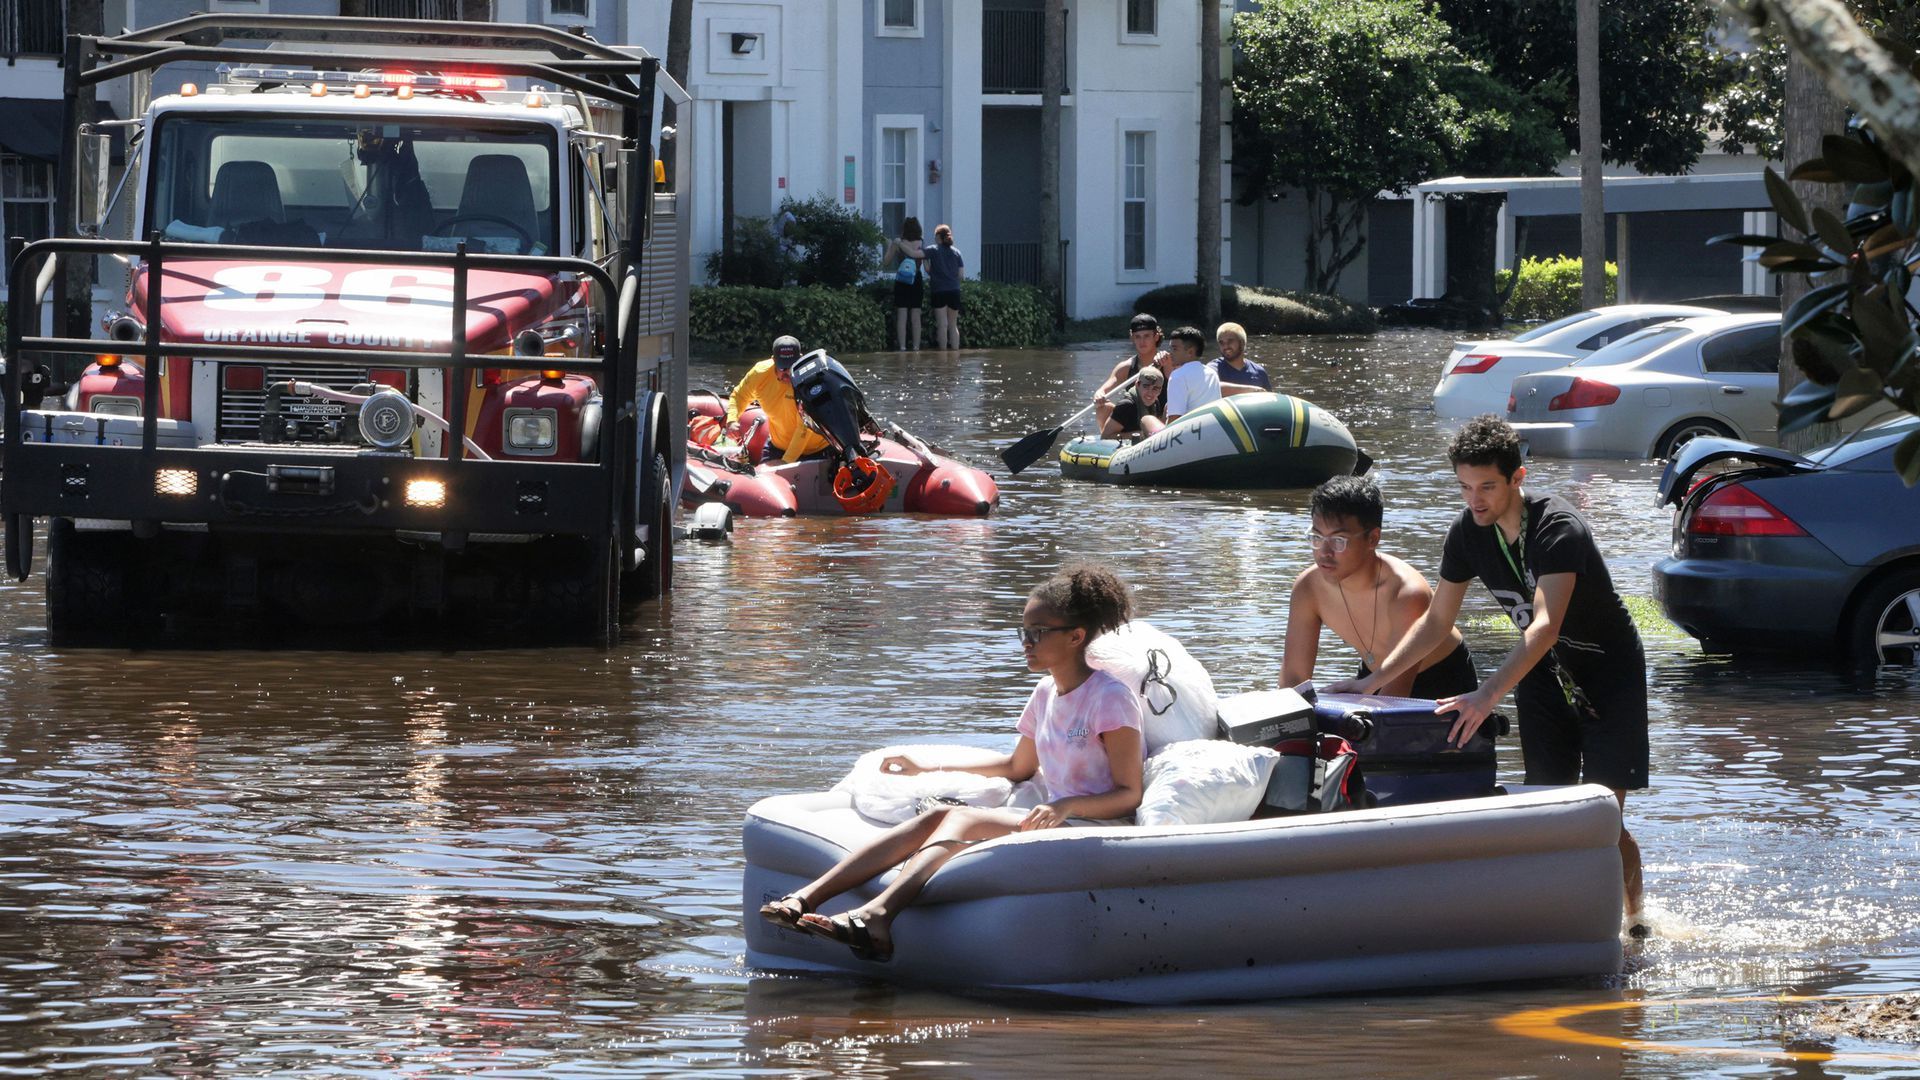 Residents of a flooded neighborhood in Florida use an air mattress to carry belongings out of their homes, Sep. 30. Photo: Joe Burbank/Orlando Sentinel/Tribune News Service via Getty Images